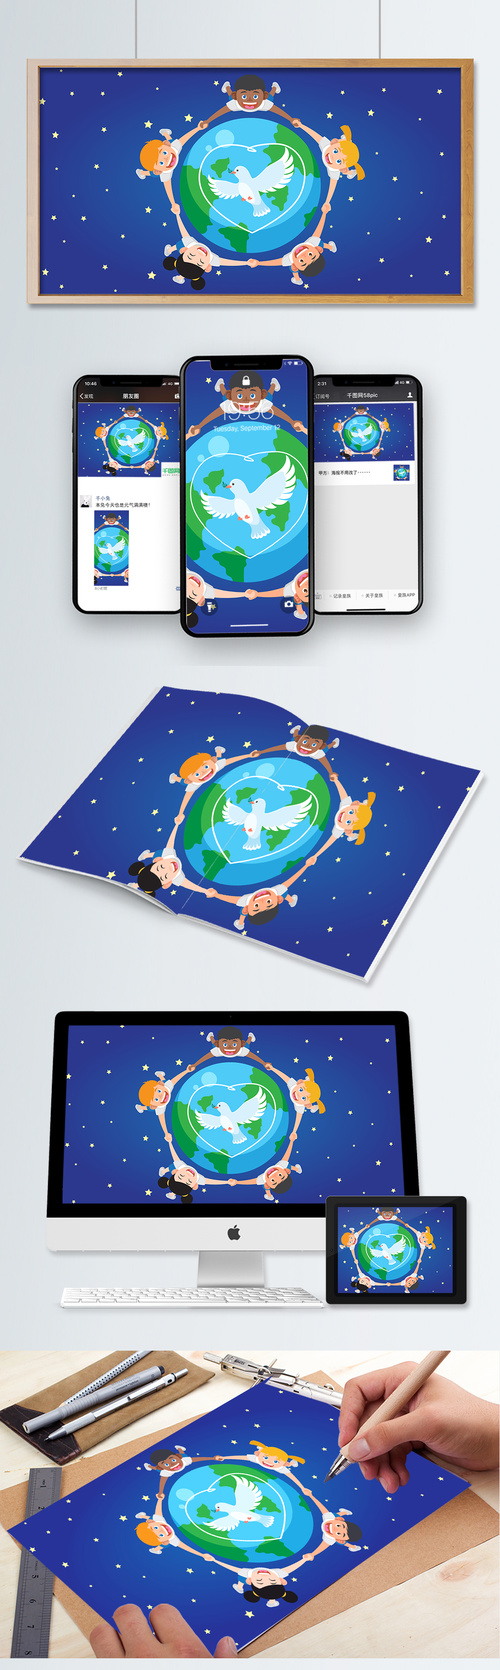 Countries children hand in hand around the earth vector